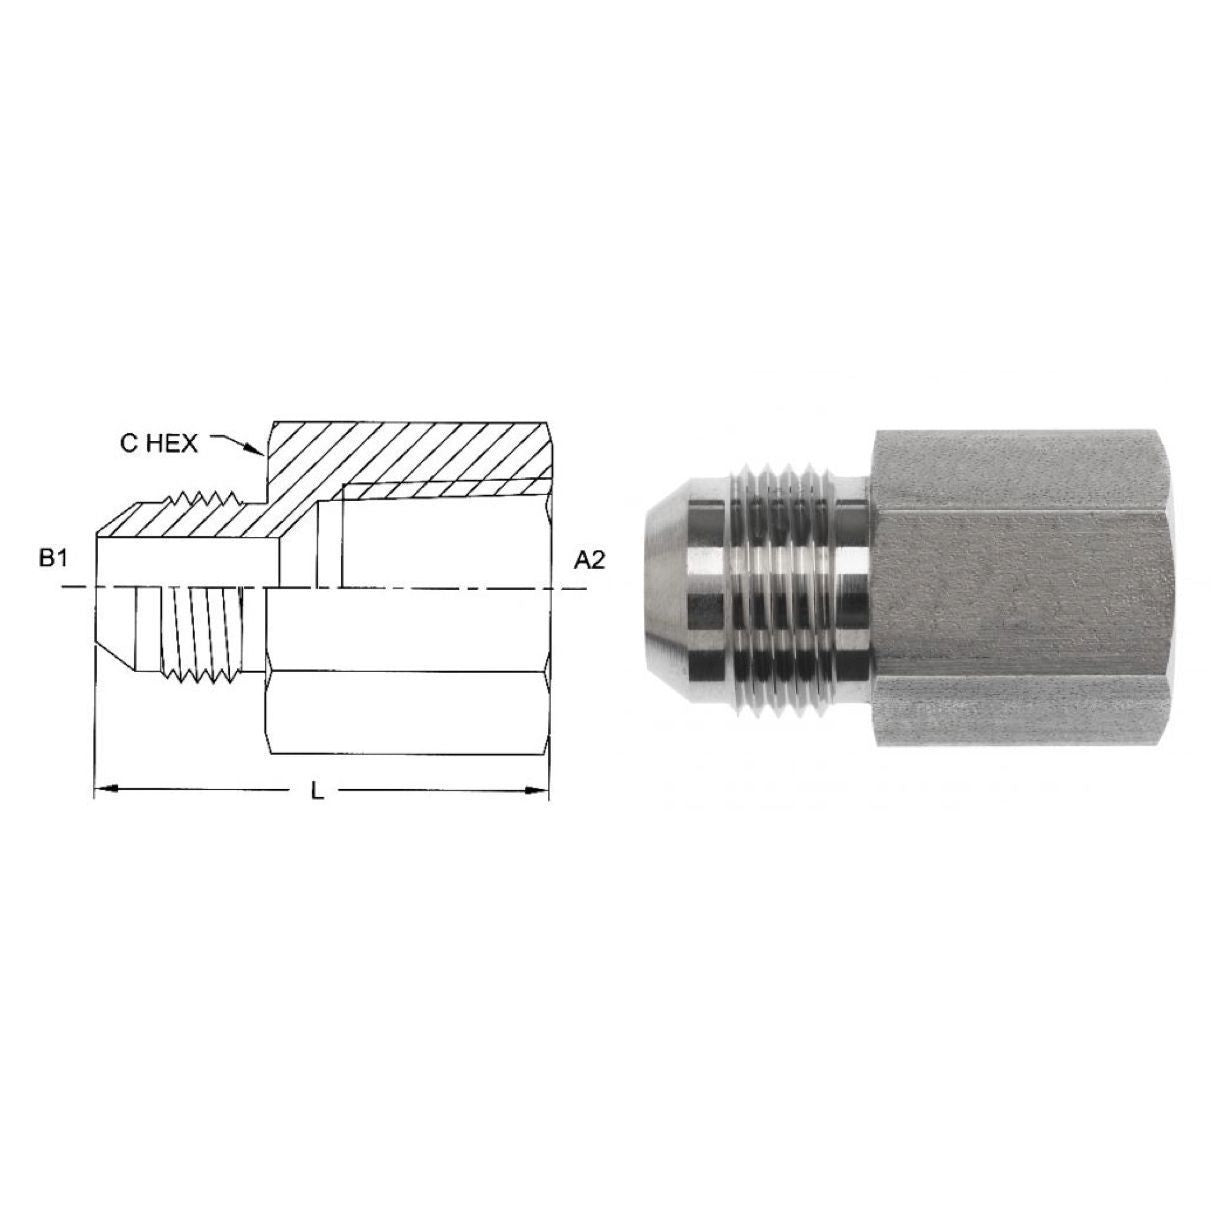 2405-08-16 : OneHydraulics Adapter, Straight, 0.5 (1/2") Male NPT x 1" Female, Steel, 3000psi